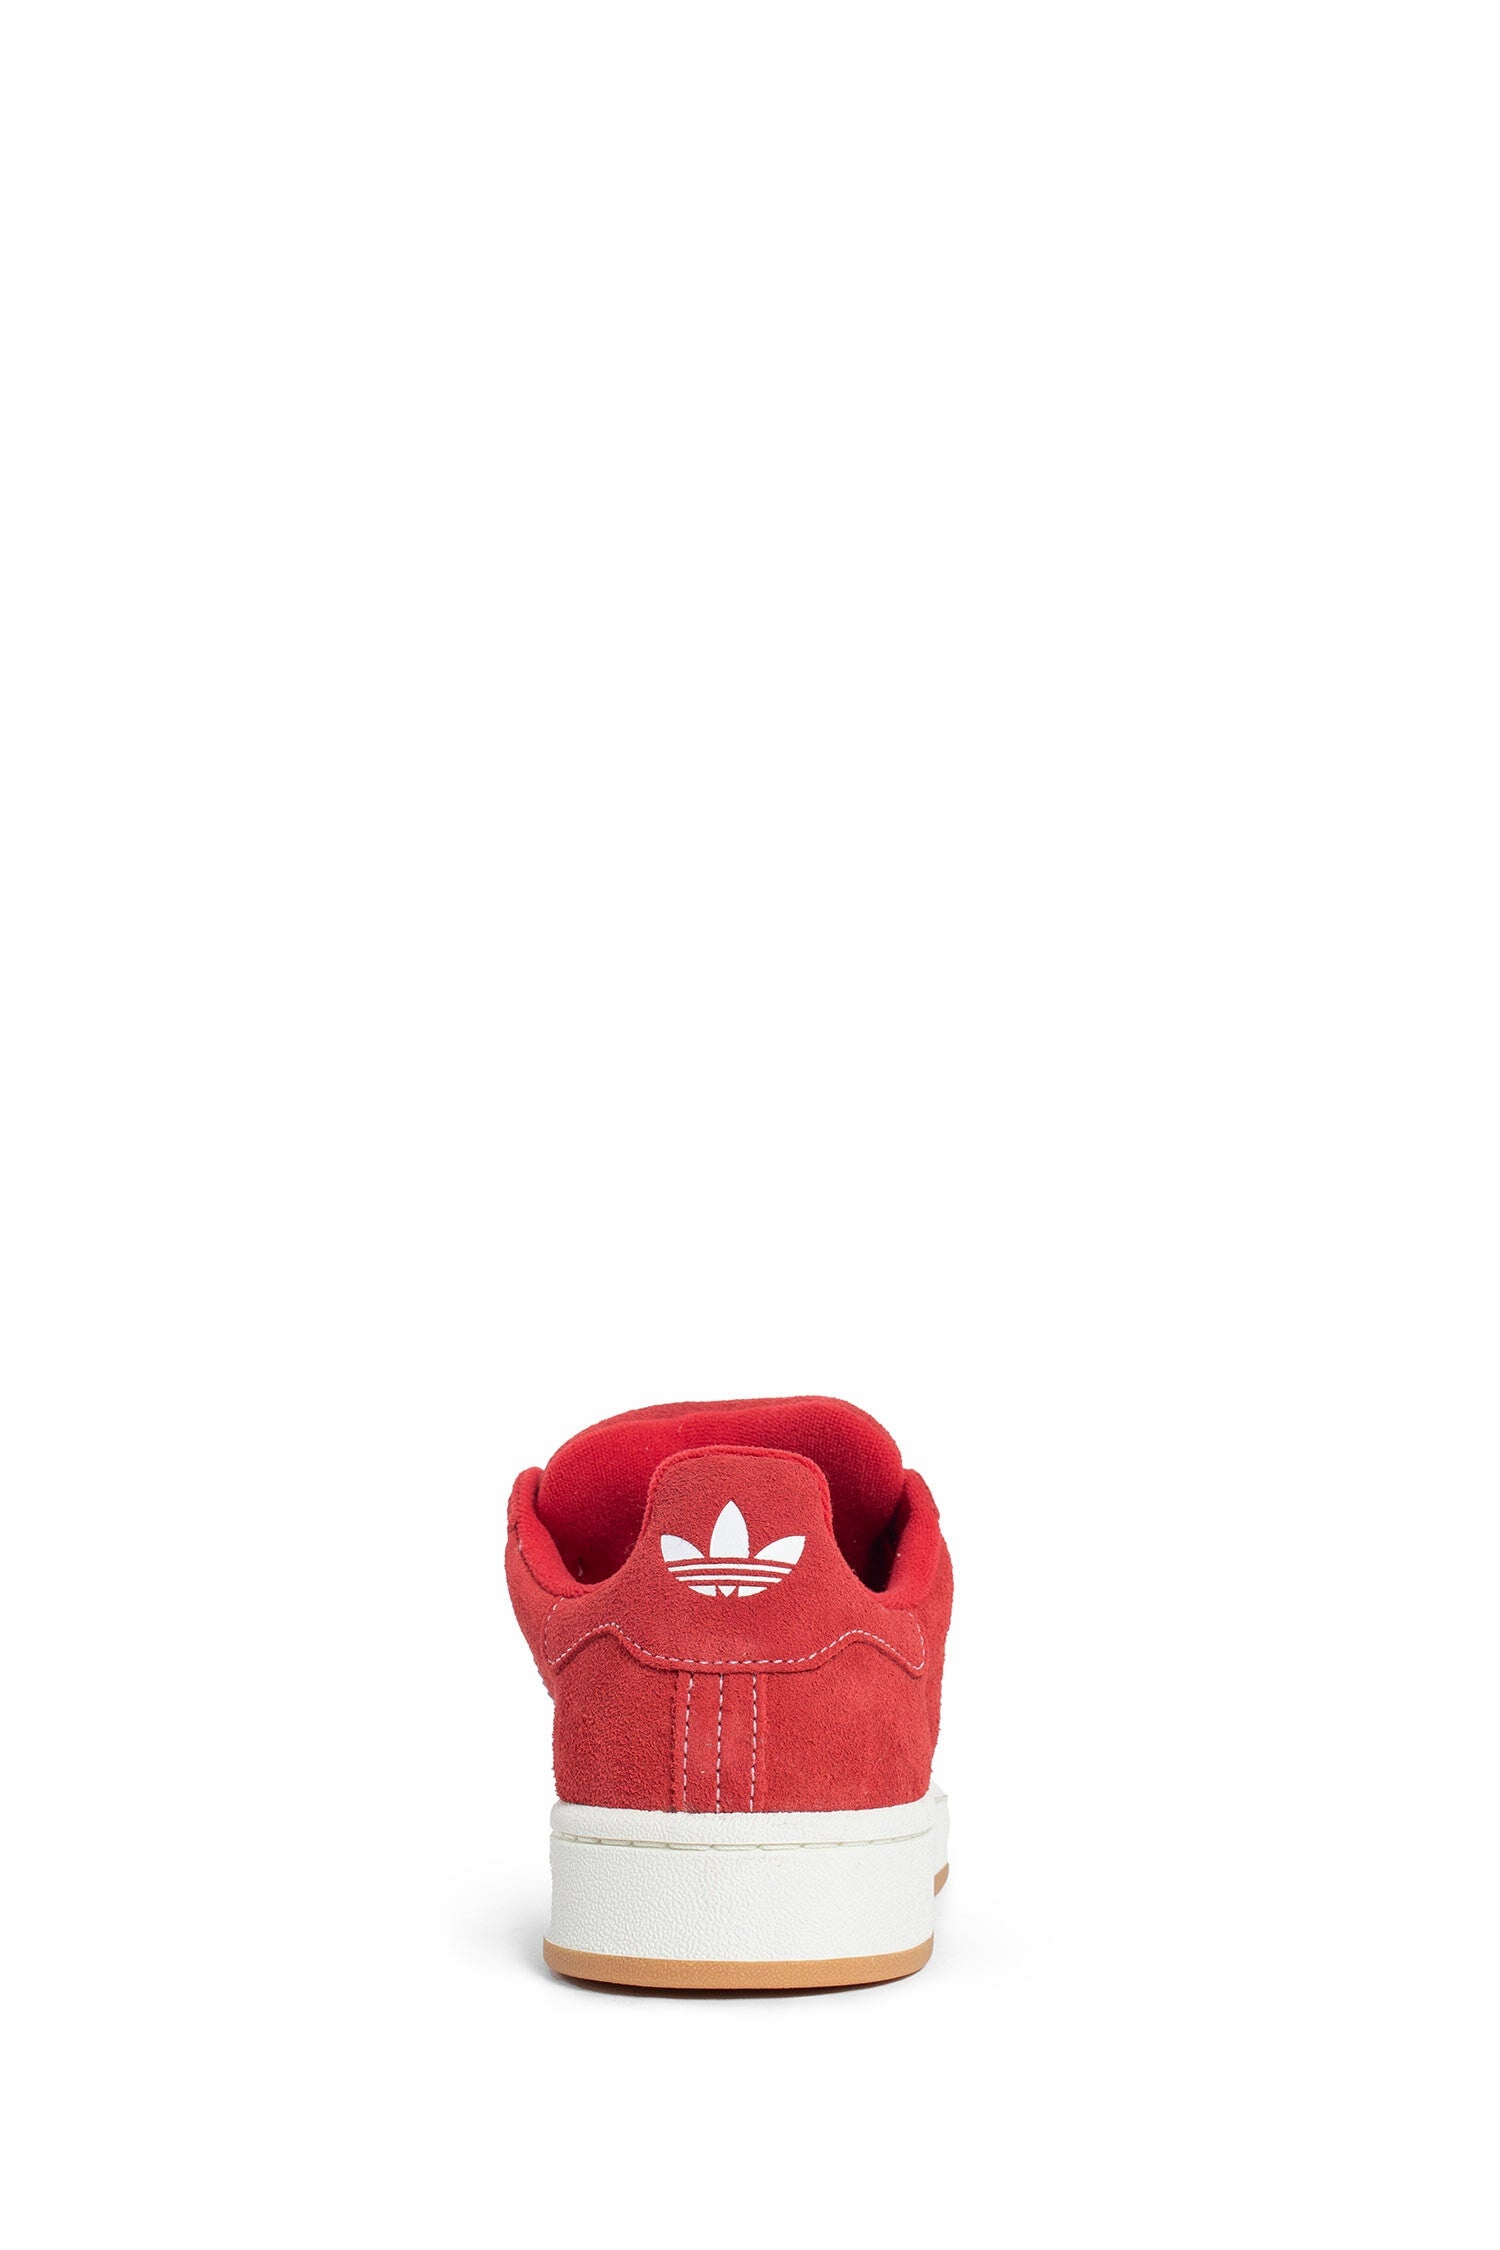 ADIDAS UNISEX RED SNEAKERS - 3